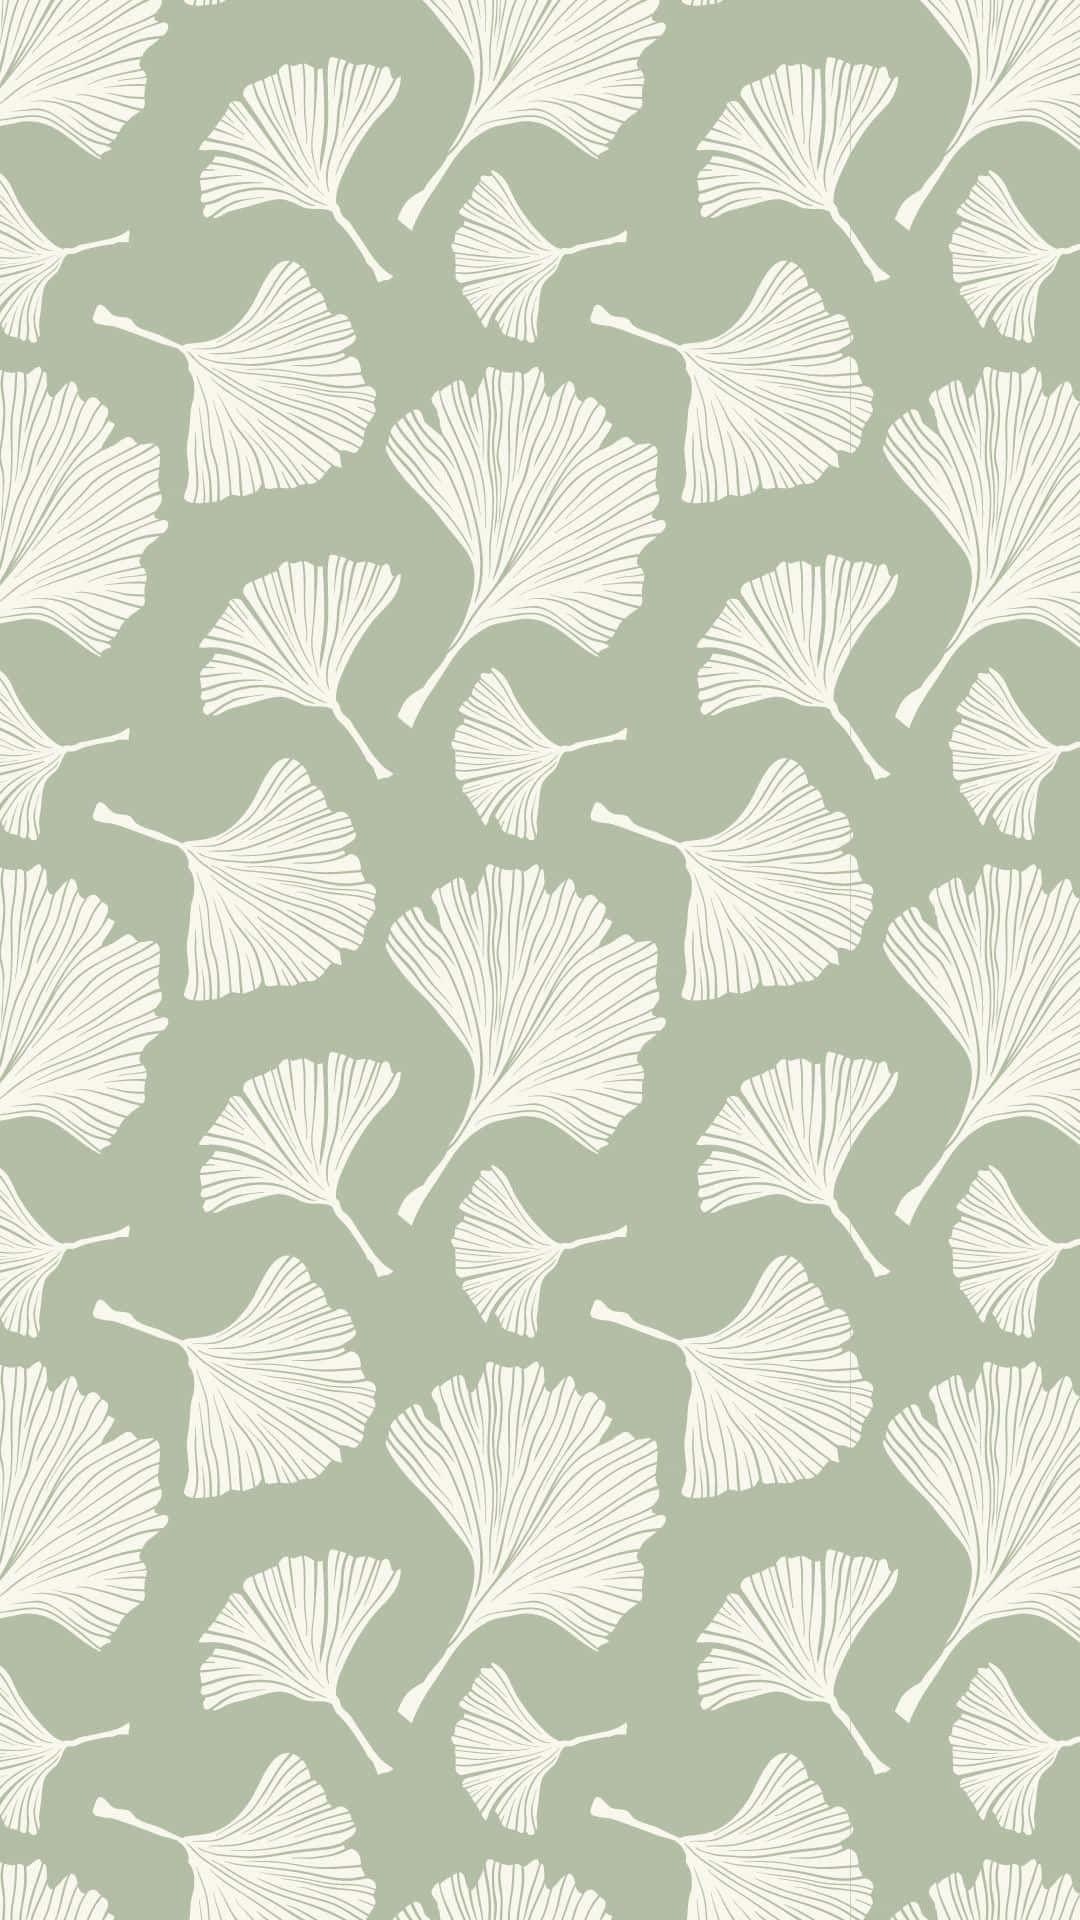 Ginkgo Leaves Drawn On A Cute Sage Green Surface Background